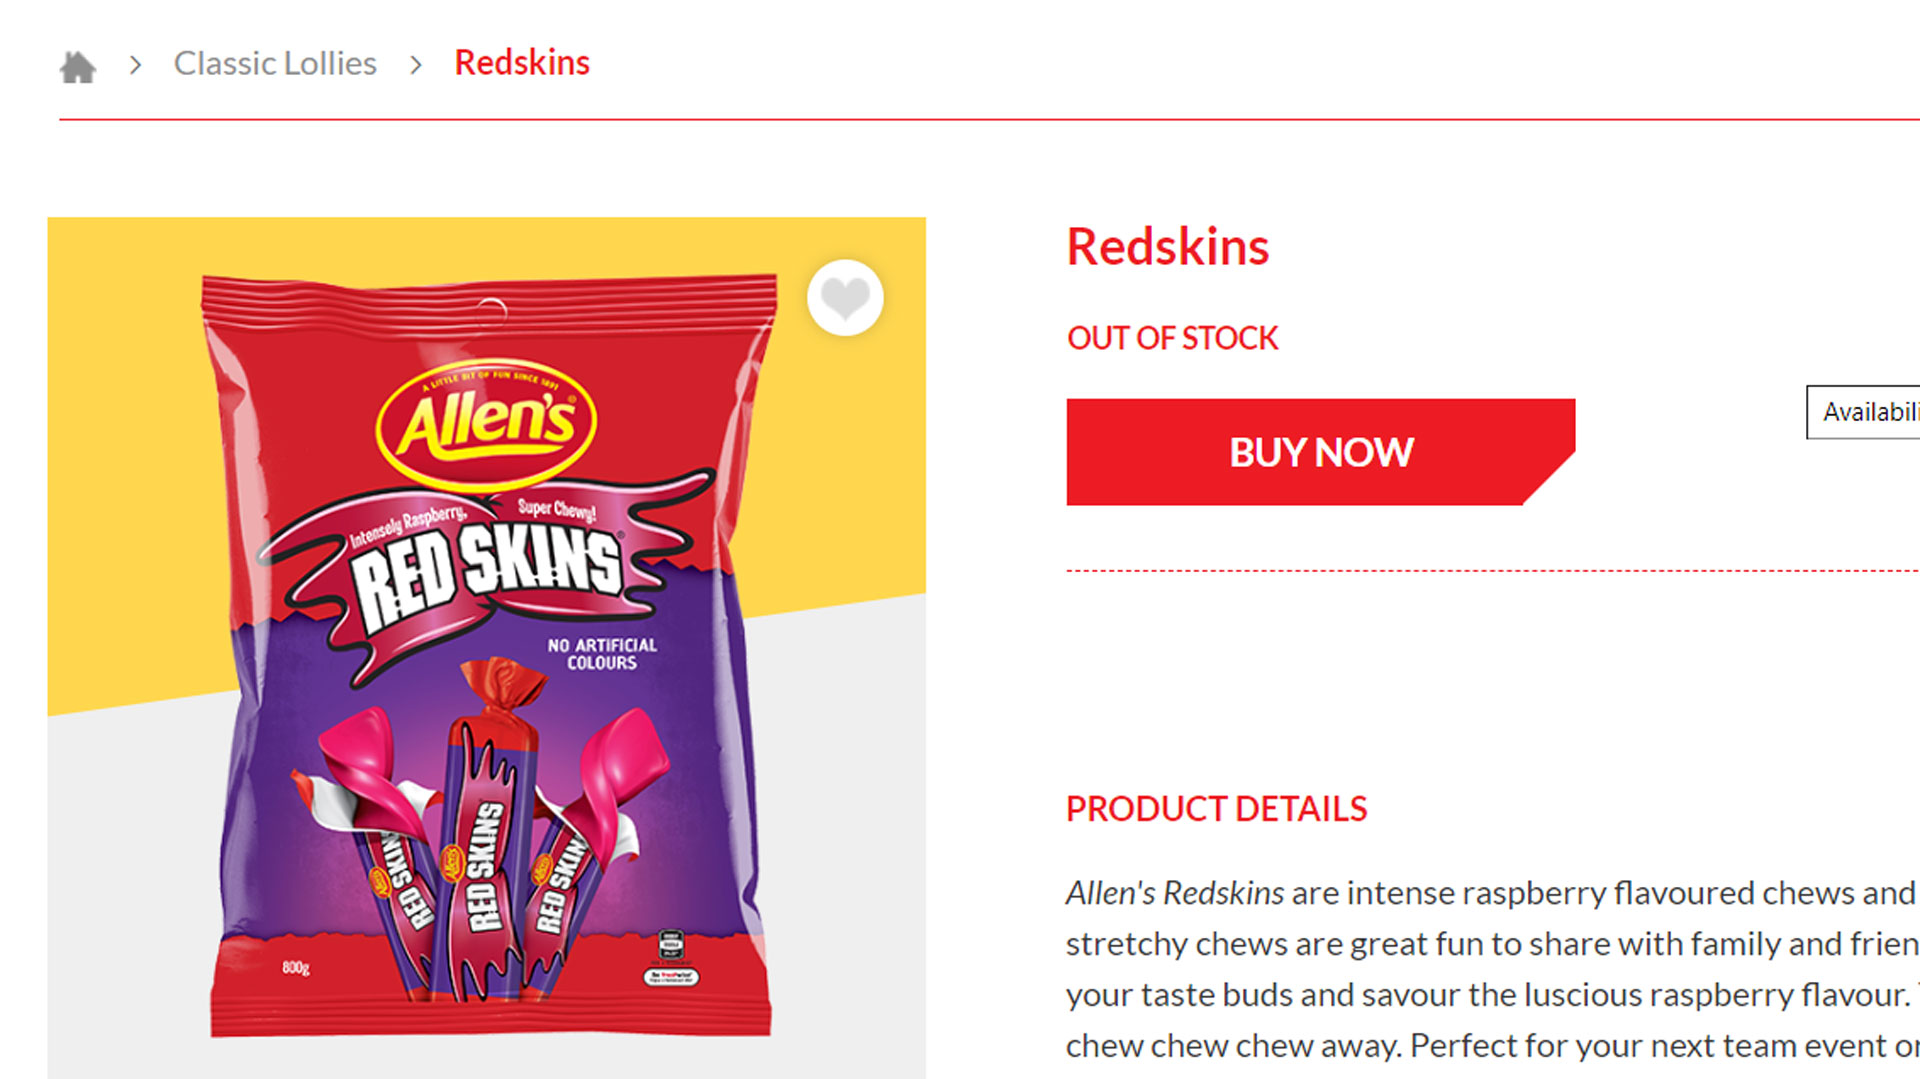 The Name Redskins Proves Too Controversial for Australian Candy Company